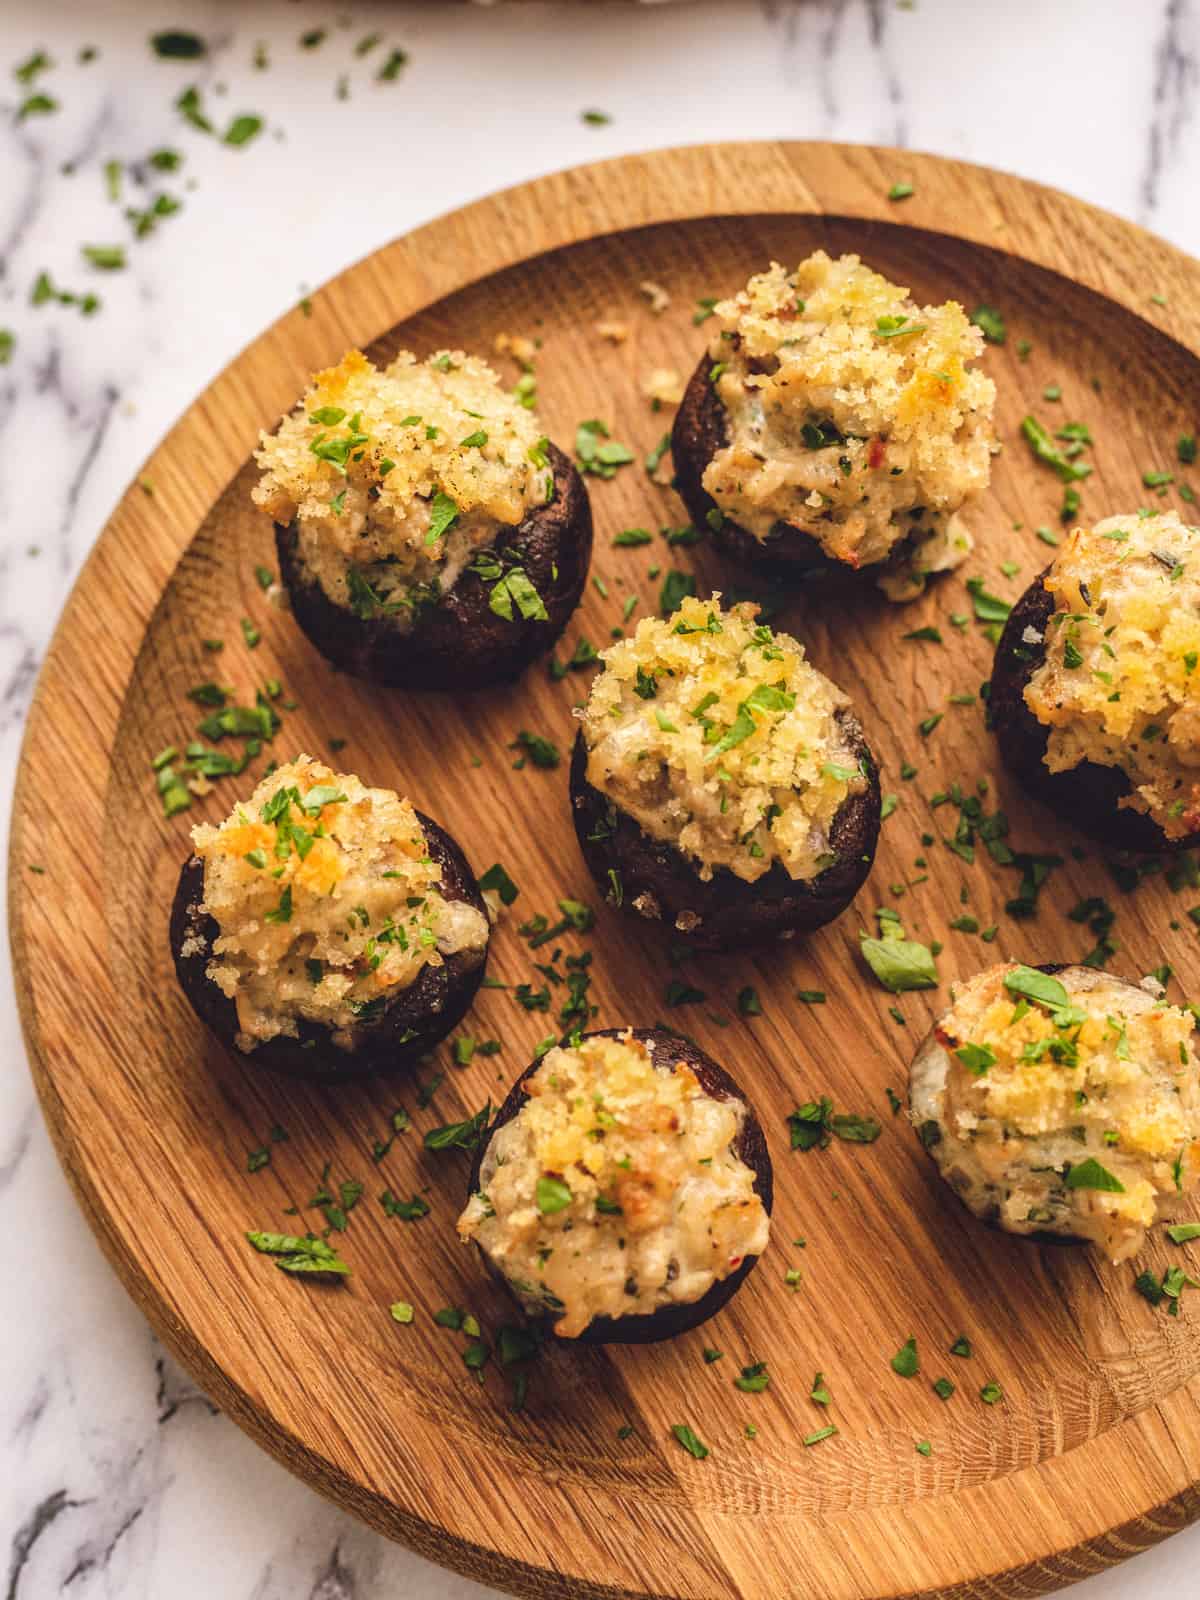 Stuffed Mushrooms with sausage and breadcrumb topping on wooden serving platter.